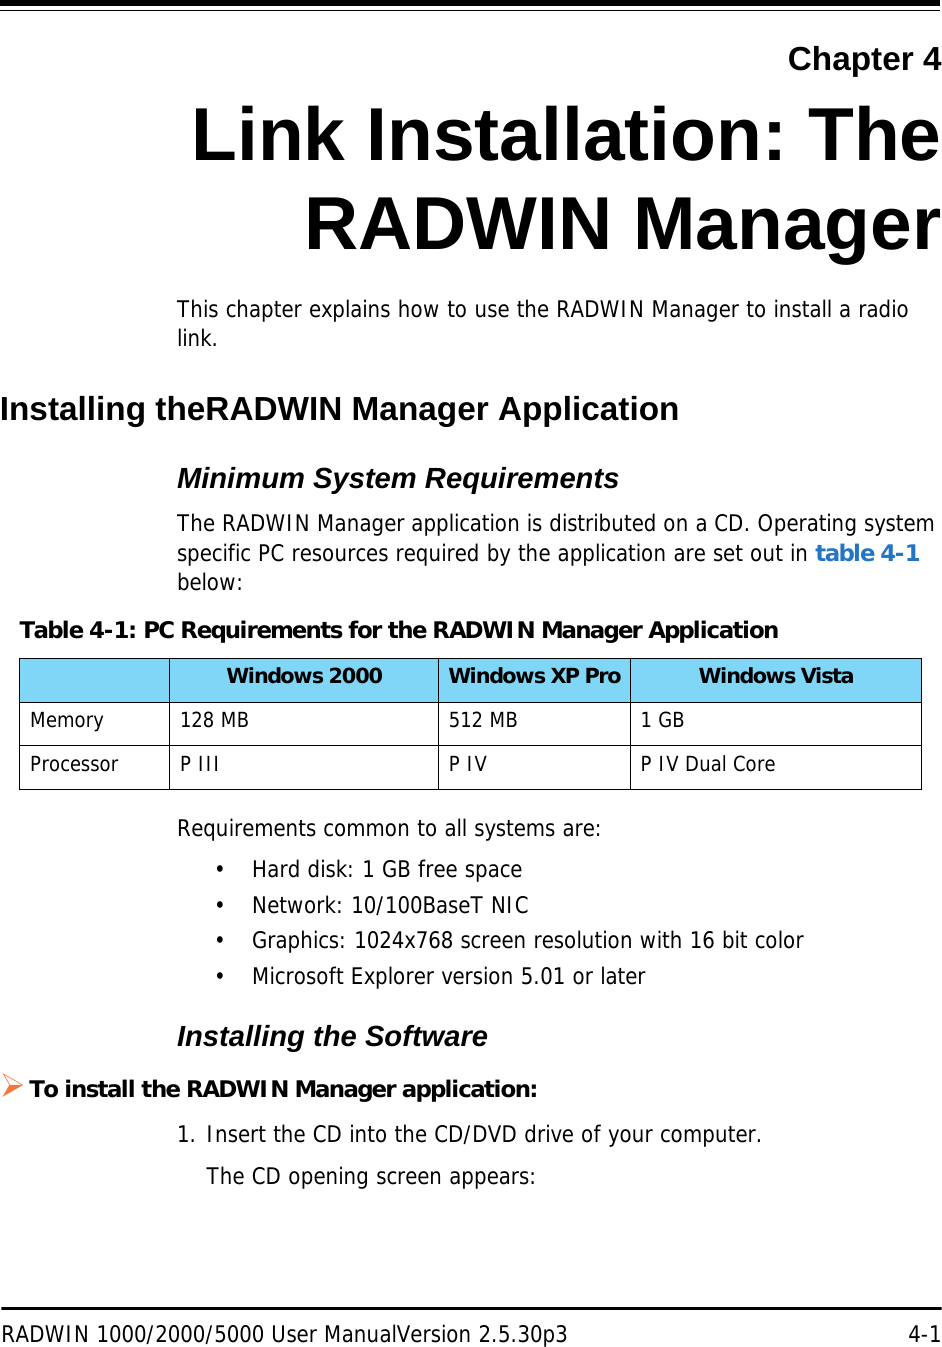 RADWIN 1000/2000/5000 User ManualVersion 2.5.30p3 4-1Chapter 4Link Installation: TheRADWIN ManagerThis chapter explains how to use the RADWIN Manager to install a radio link.Installing theRADWIN Manager ApplicationMinimum System RequirementsThe RADWIN Manager application is distributed on a CD. Operating system specific PC resources required by the application are set out in table 4-1 below:Requirements common to all systems are:• Hard disk: 1 GB free space• Network: 10/100BaseT NIC• Graphics: 1024x768 screen resolution with 16 bit color• Microsoft Explorer version 5.01 or laterInstalling the SoftwareTo install the RADWIN Manager application:1. Insert the CD into the CD/DVD drive of your computer.The CD opening screen appears:Table 4-1: PC Requirements for the RADWIN Manager ApplicationWindows 2000 Windows XP Pro Windows VistaMemory 128 MB 512 MB 1 GBProcessor P III P IV P IV Dual Core